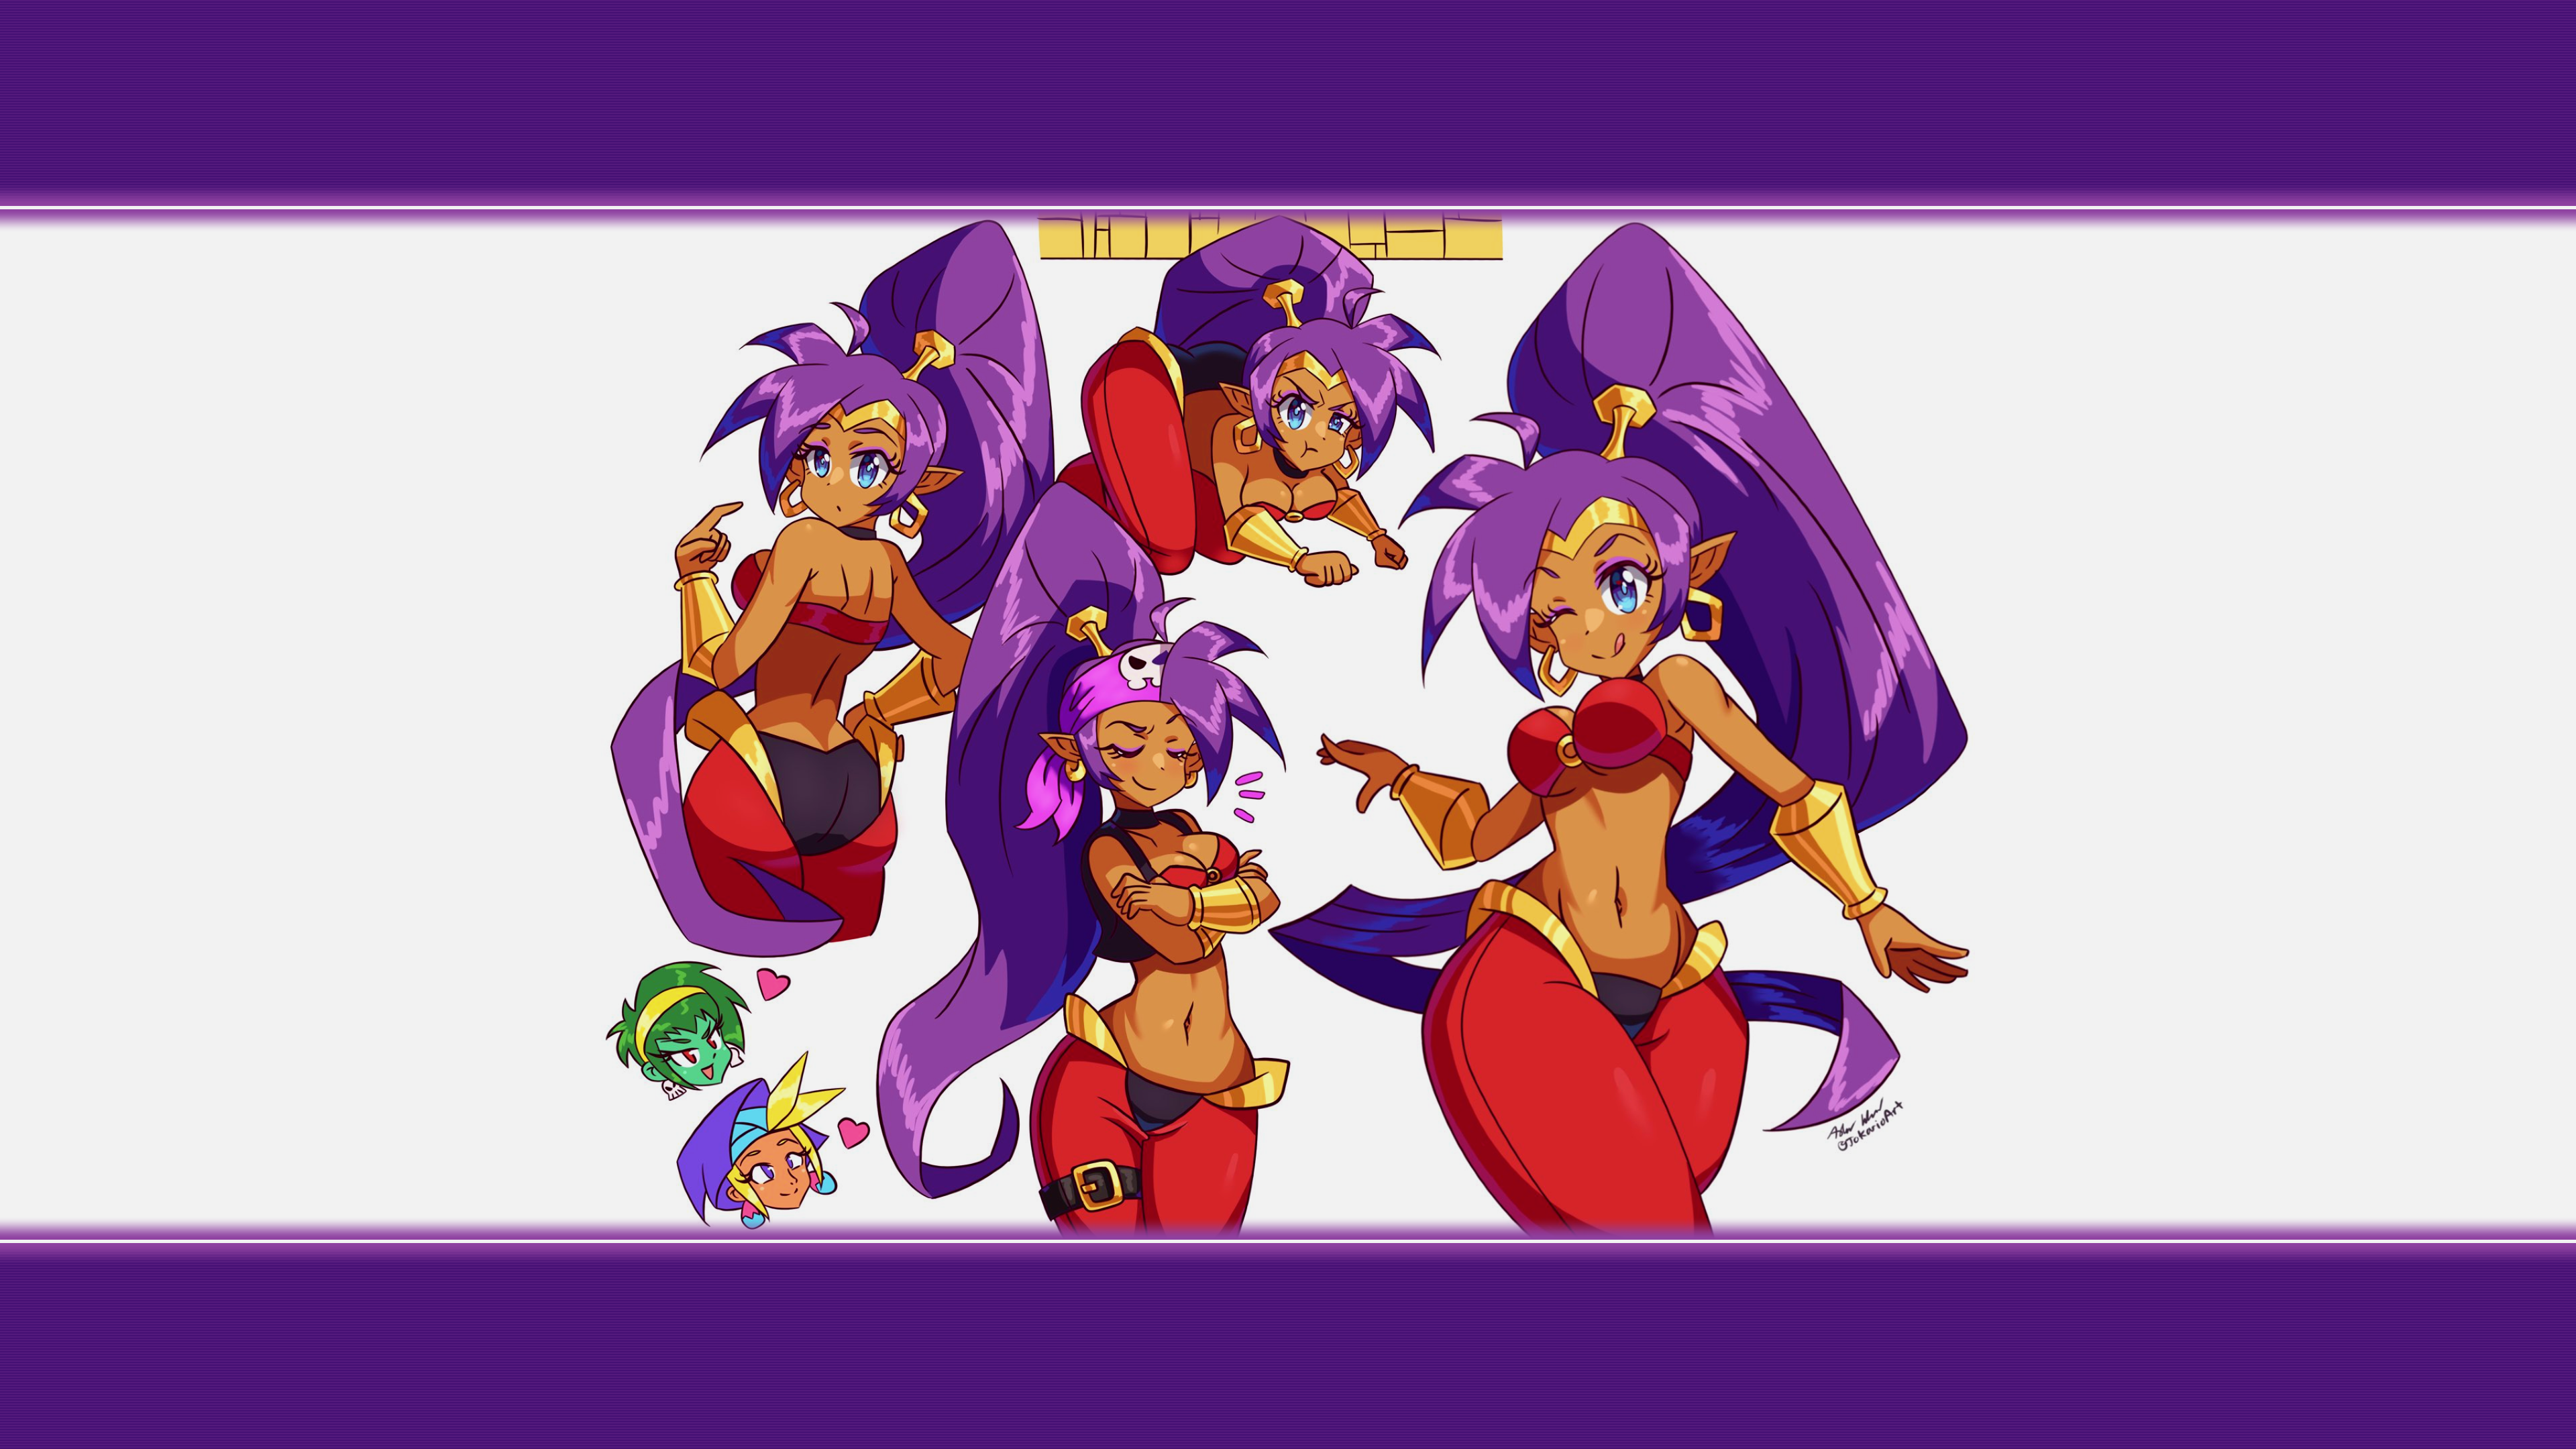 Anime 3840x2160 Shantae Shantae: Half-Genie Hero Shantae: Risky's Revenge Shantae and the Pirate's Curse Rottytops (Shantae) Sky (Shantae) bandanas ponytail genie girl Genie bikini top red pants pants blue eyes tiaras headband bent over crawling dancing dancer Belly Dancer pointy ears earring hoop earrings belly belly button bare midriff pirate girl long hair purple hair purple hairband blonde green hair green skin tanned tan ass thighs thighs together bracelets armlet heart (design) wink cleavage closed eyes looking at viewer collage back boobs video games video game girls skull makeup tongue out simple background minimalism